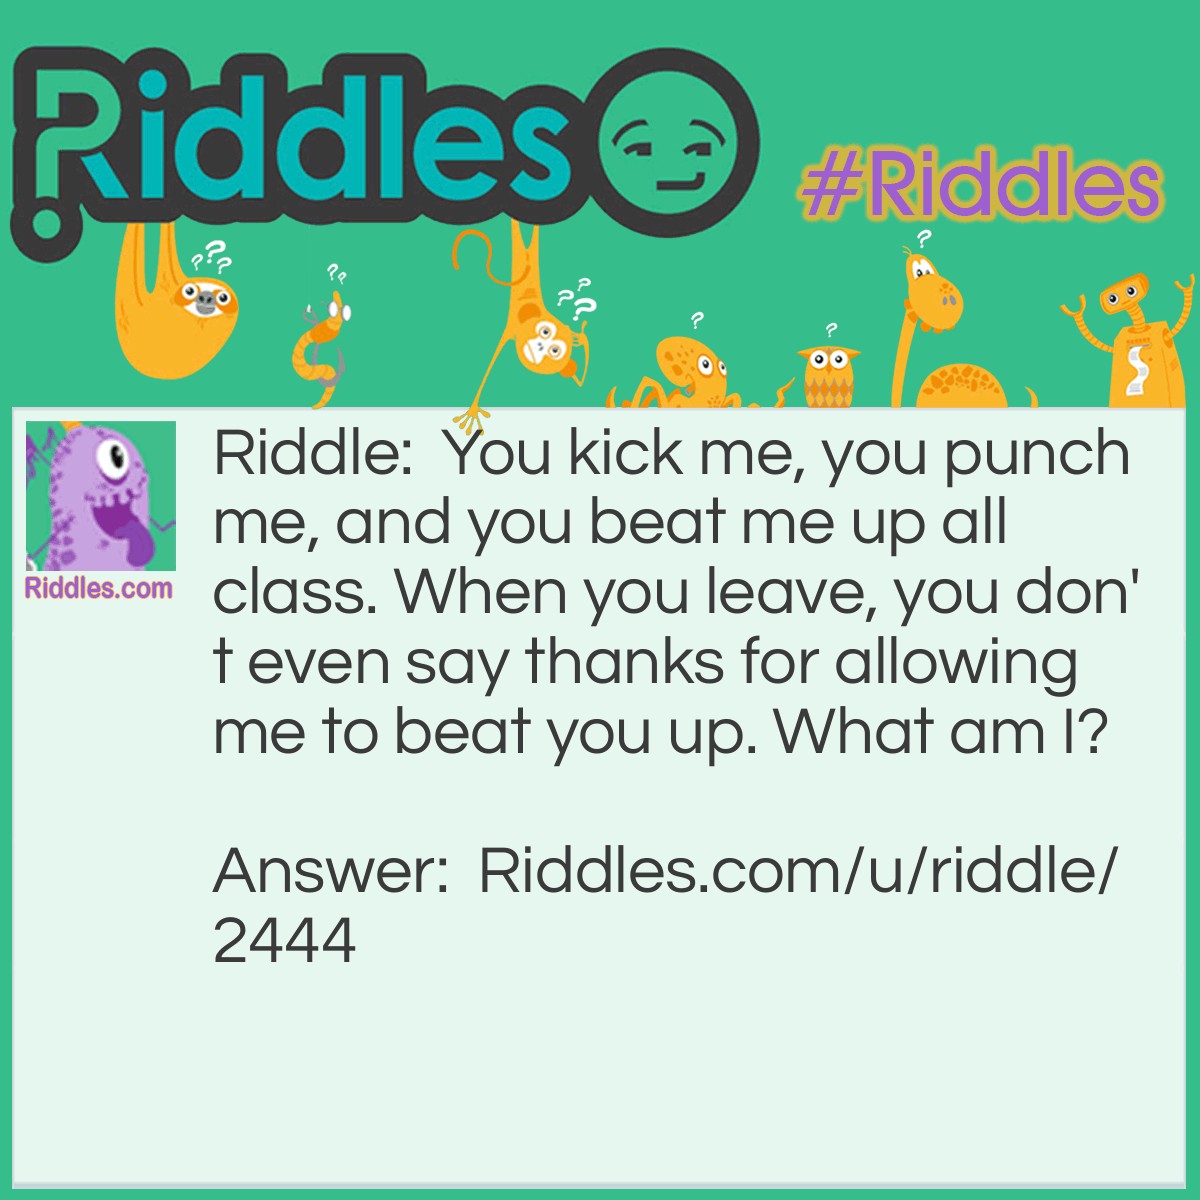 Riddle: You kick me, you punch me, and you beat me up all class. When you leave, you don't even say thanks for allowing me to beat you up. What am I? Answer: A punchbag.